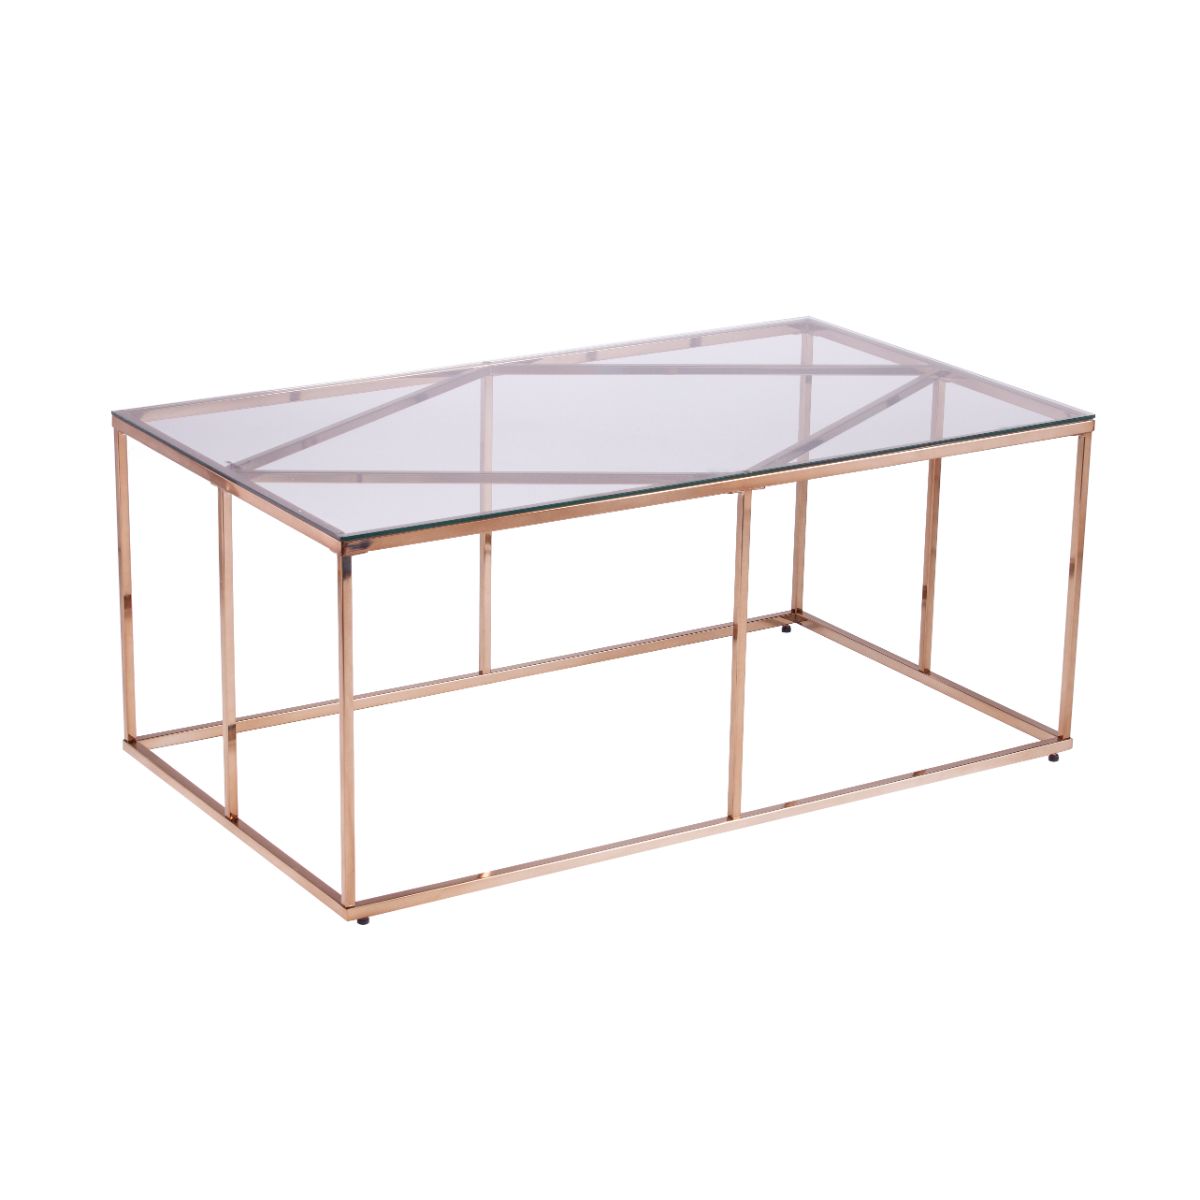 42" Gold and Black Contemporary Style Rectangular Glass Top Cocktail Table - image 4 of 4